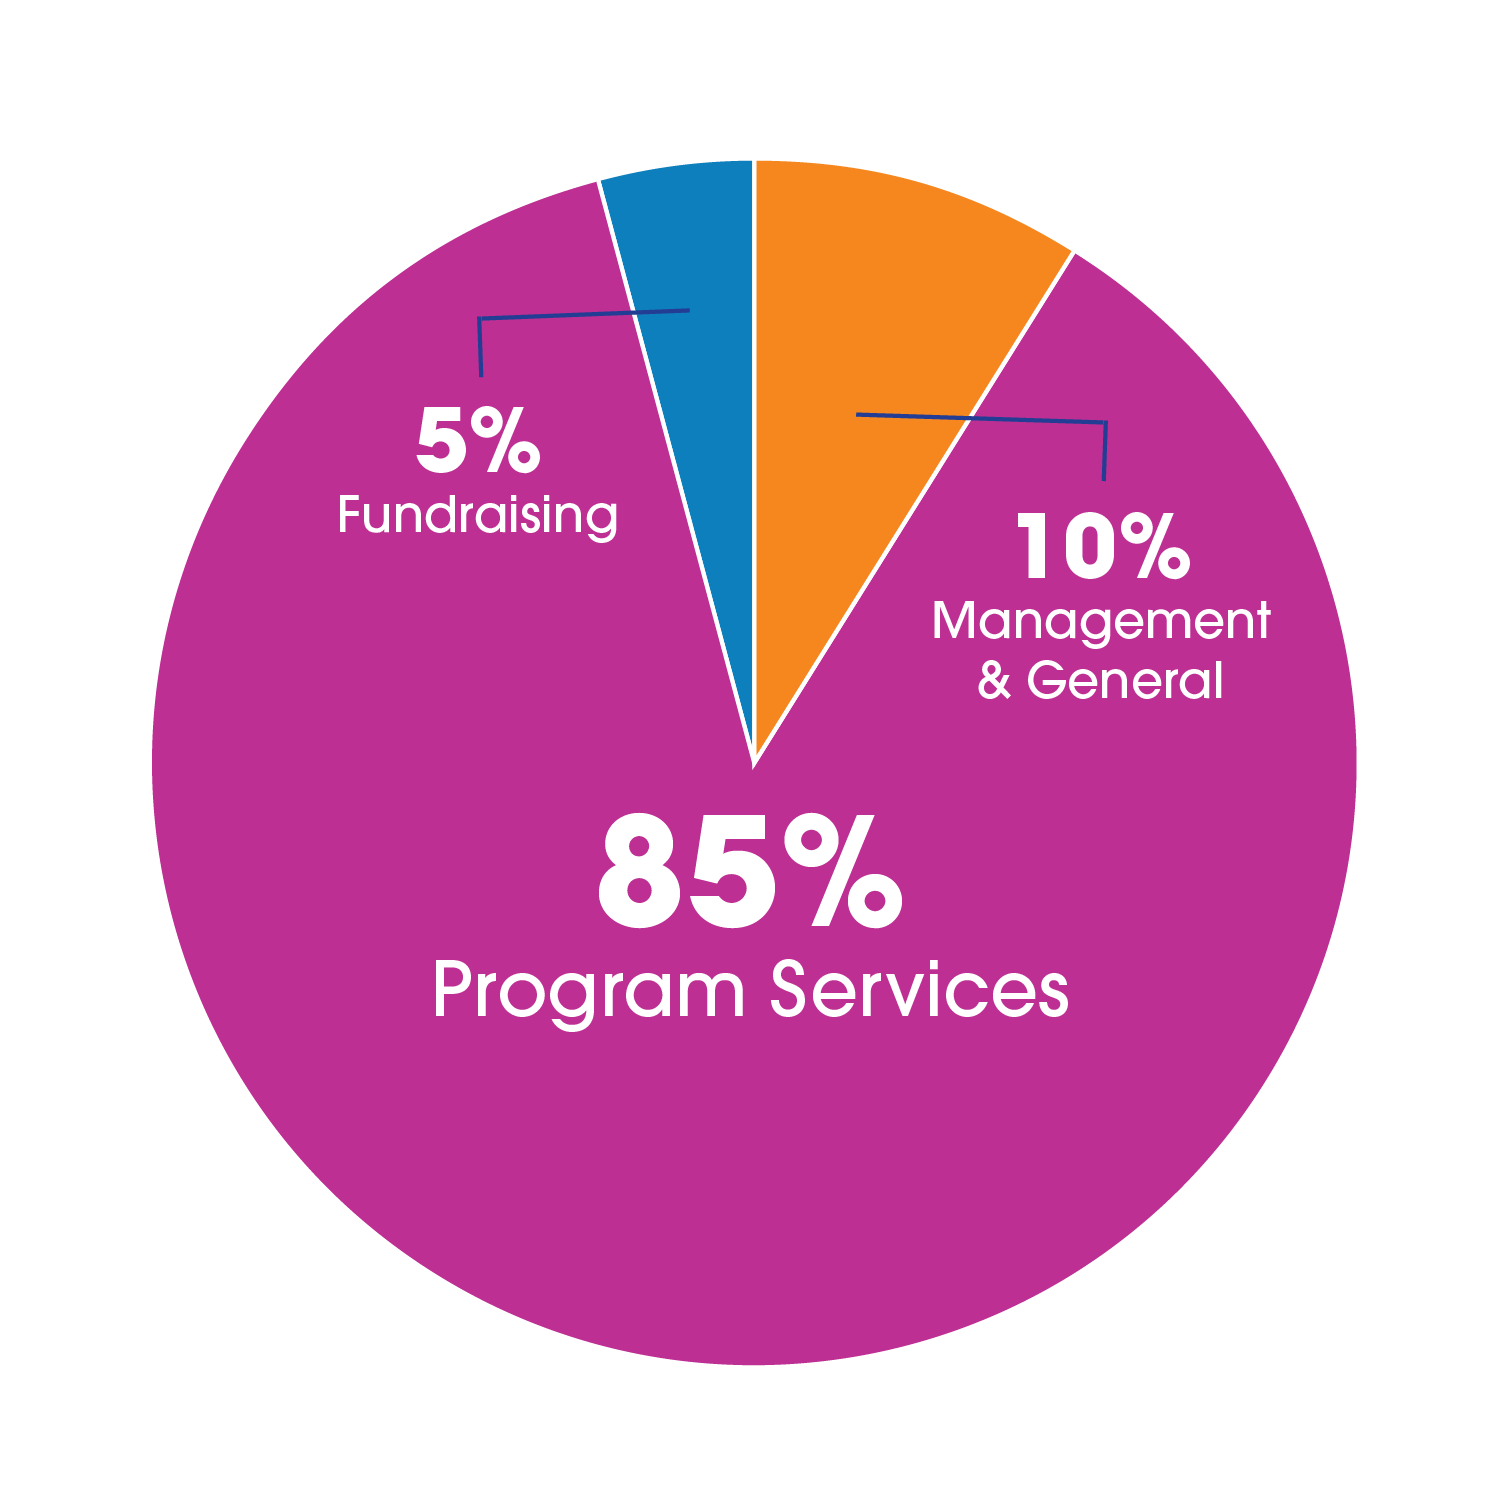 Pie chart showing 85% for Program Services, 10% for Management & General and 5% for Fundraising